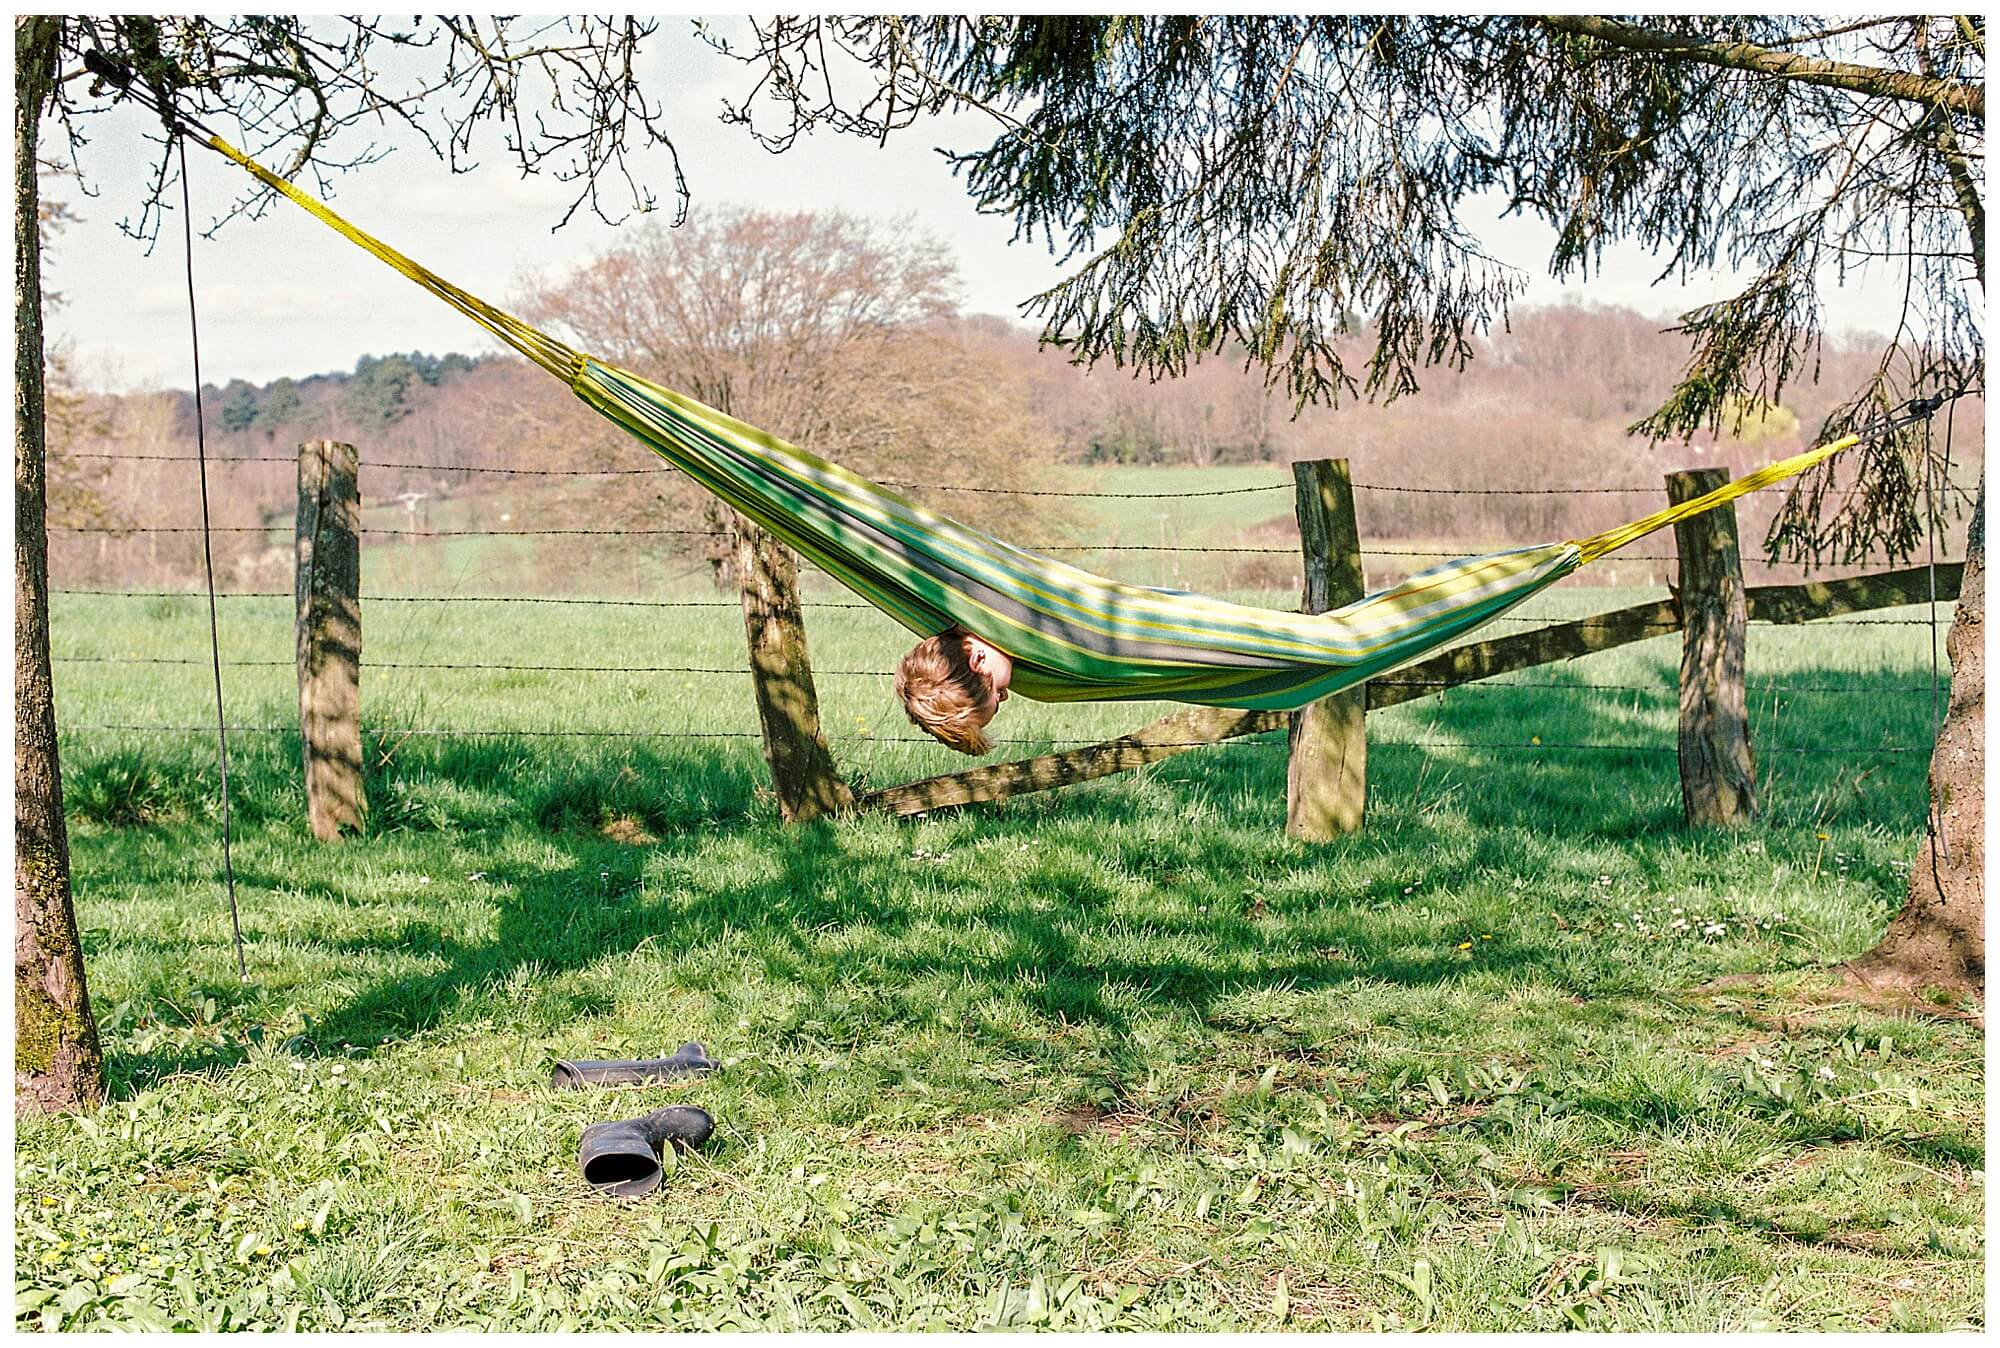 A young French boy hangs upside-down in a hammock. 